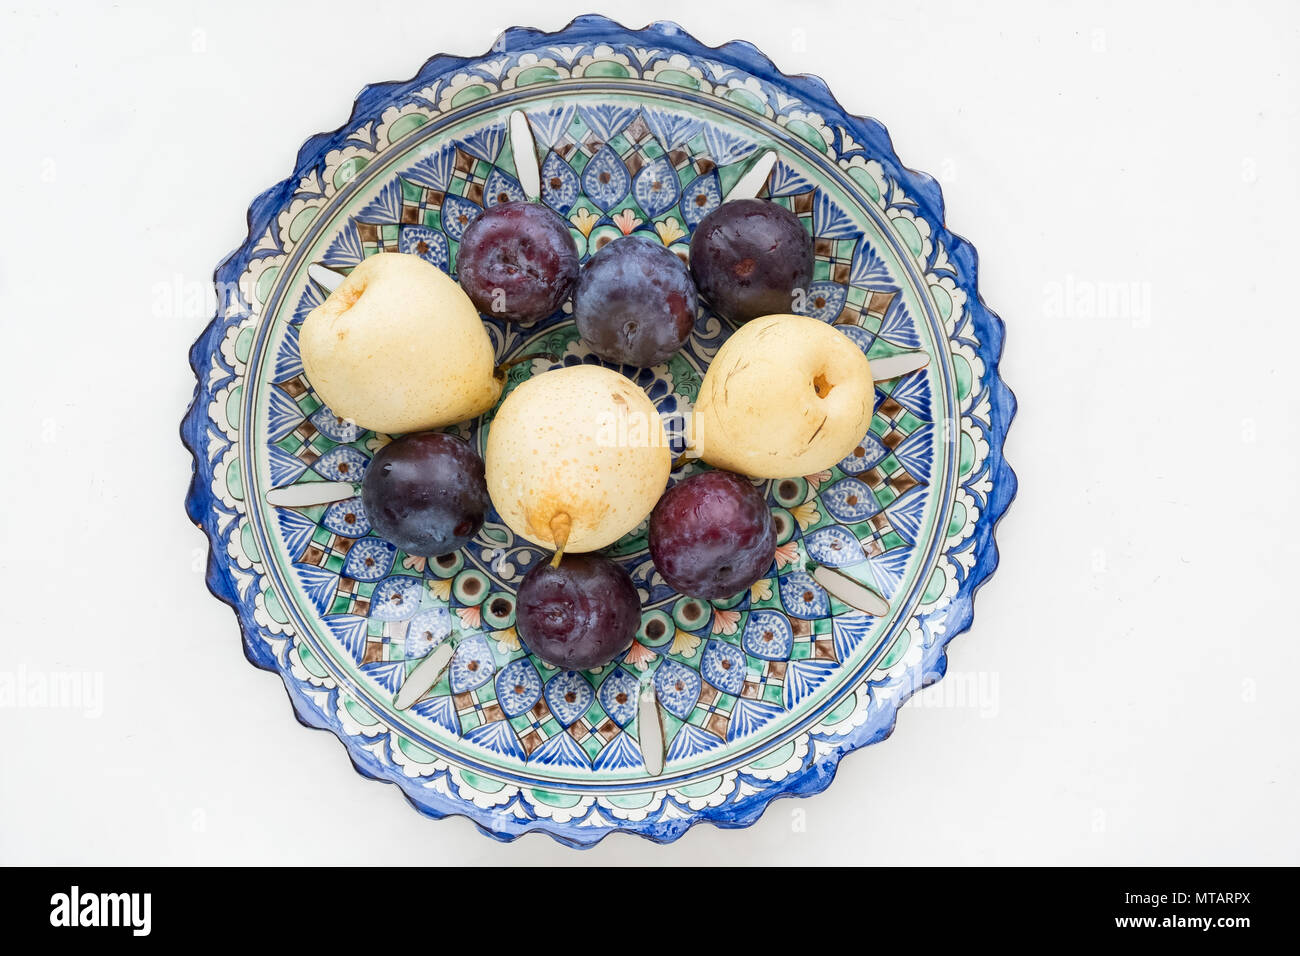 Pears and plums in an Uzbek bowl. Top view on a white background. Stock Photo